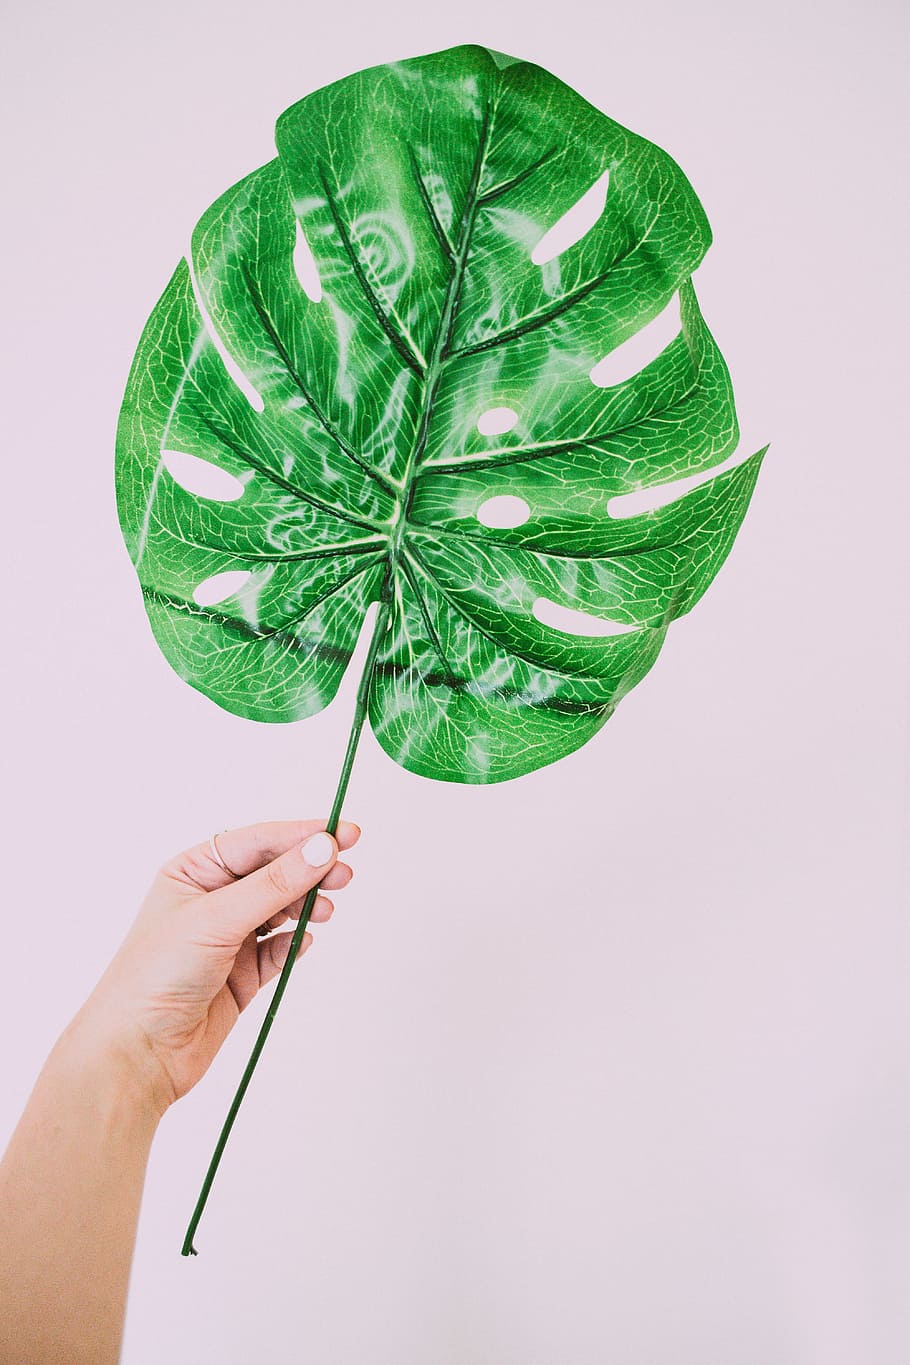 leaf, green, color, holding, beautiful, freshness, monstera, human hand